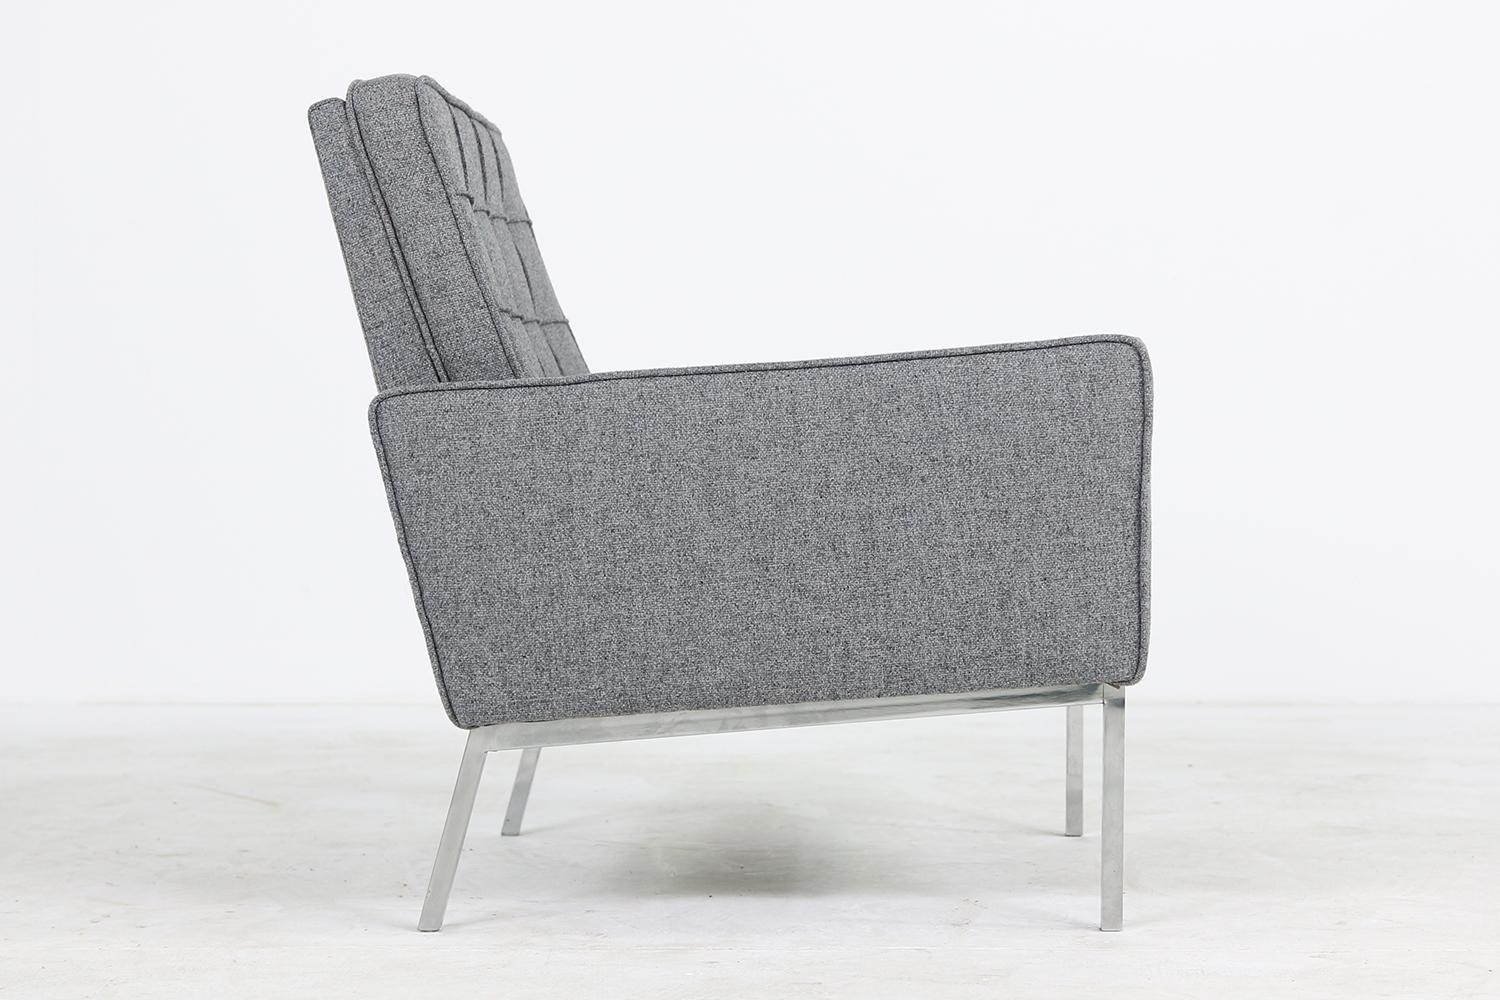 Beautiful,large and restored 1950s Florence Knoll Mod. 65a armchair, reupholstered and covered with new grey woven fabric, very good condition. Made by Knoll International.